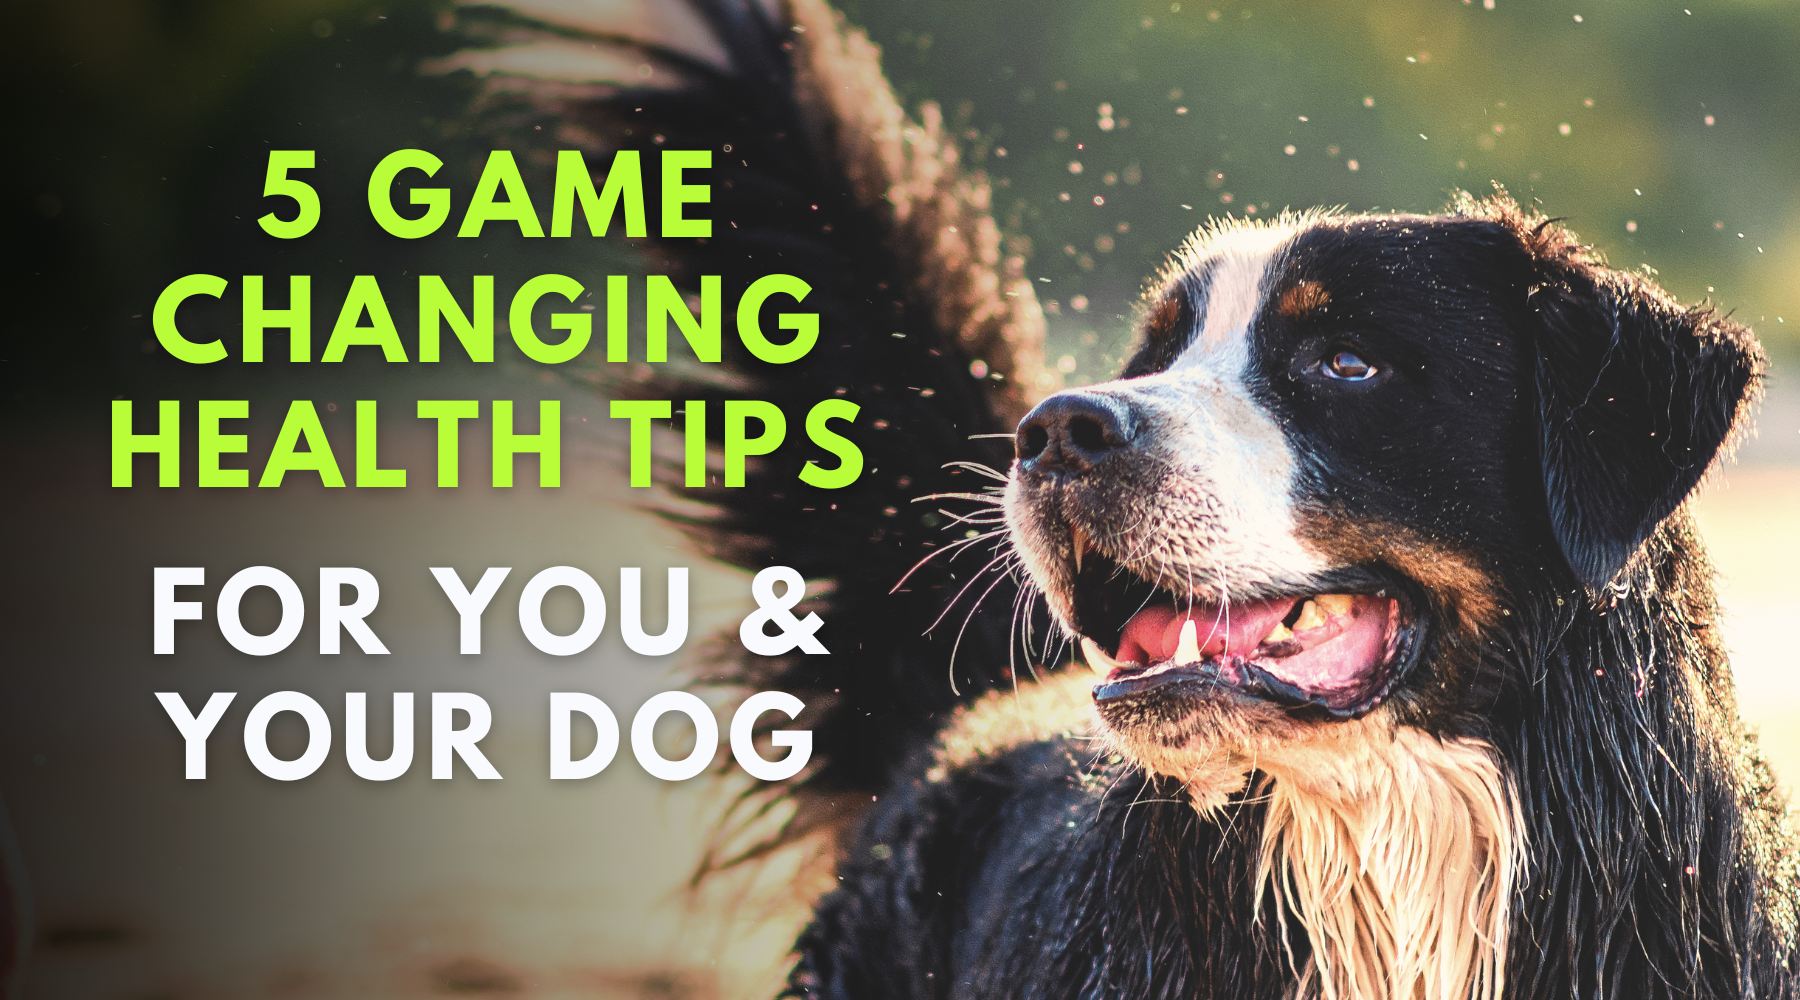 5 Game-Changing Health Tips for You and Your Dog